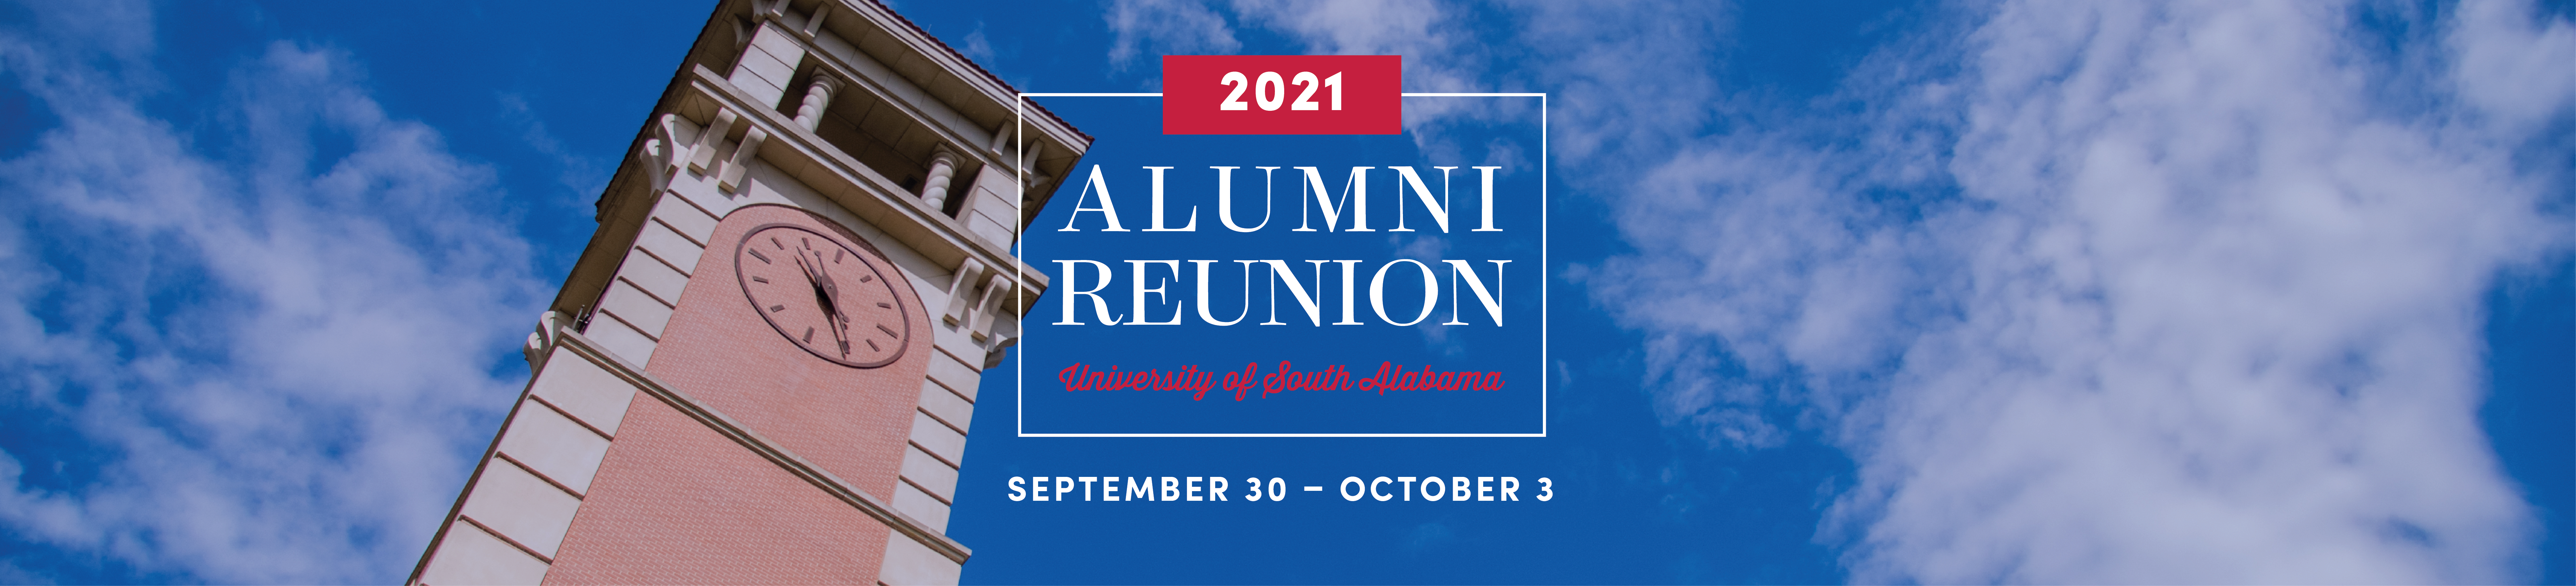 USA Alumni 2021 Reunion Weekend info with Moulton Tower.